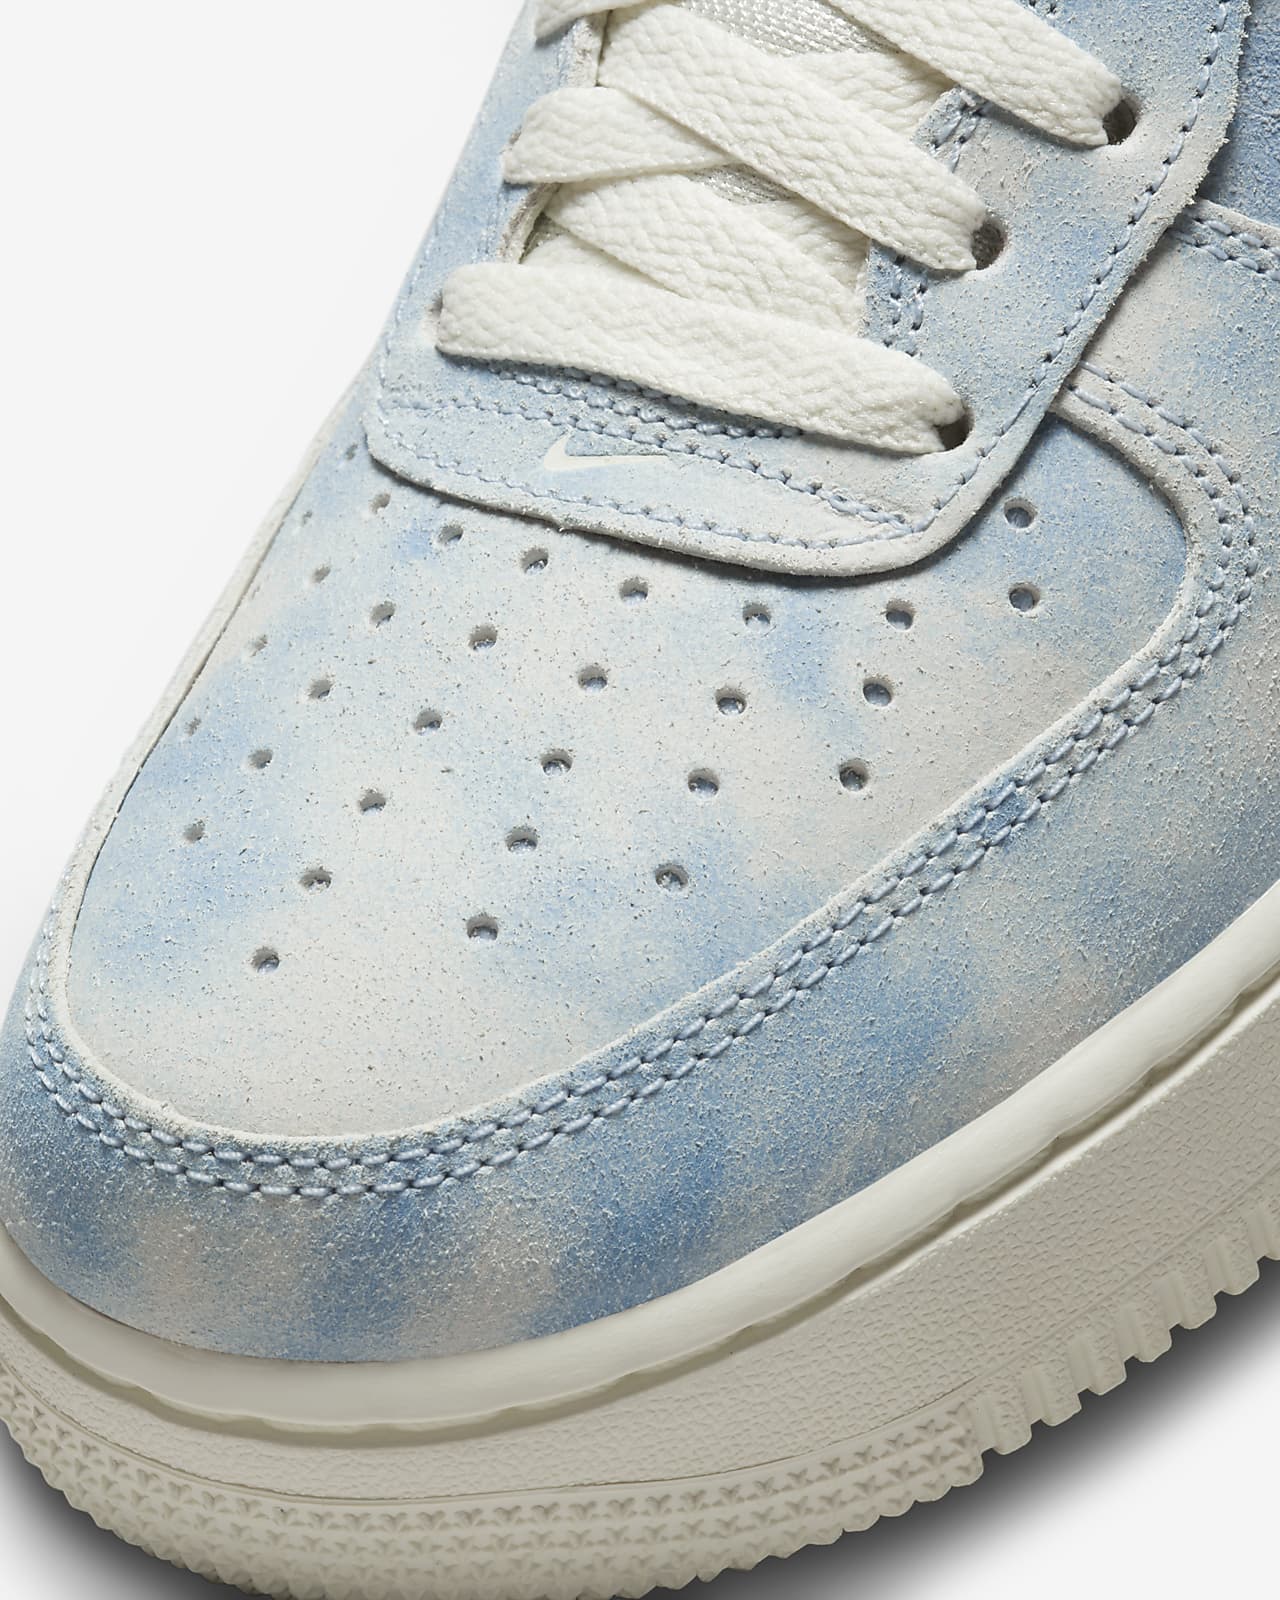 Nike Air Force 1 Low '07 LV8 Grey Suede  Nike shoes air force, Nike air  force, Nike air